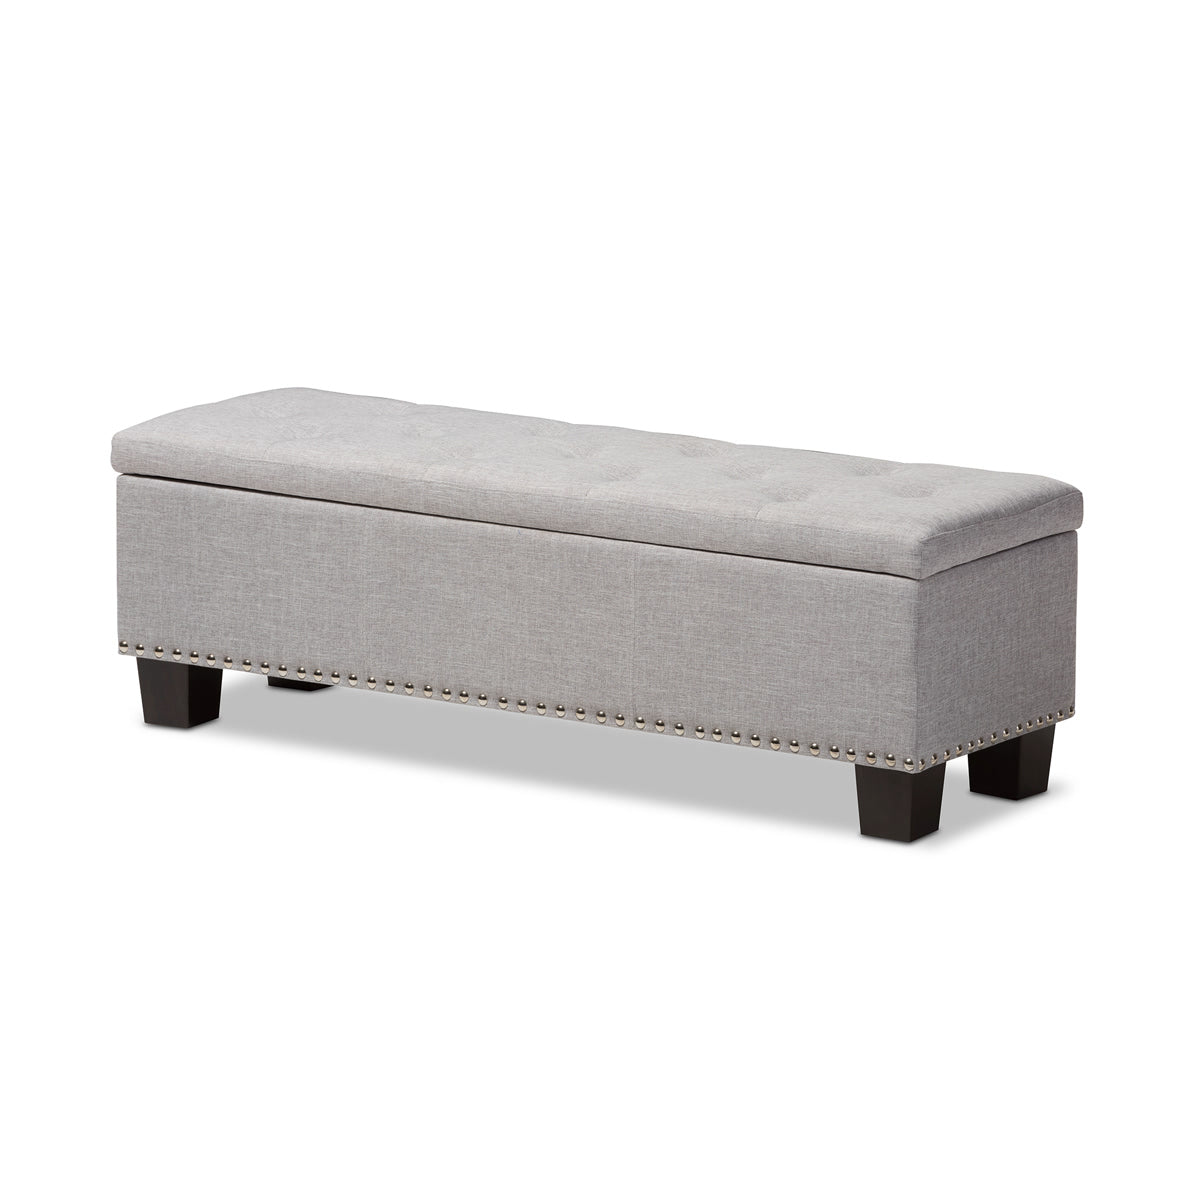 Baxton Studio Hannah Modern and Contemporary Grayish Beige Fabric Upholstered Button-Tufting Storage Ottoman Bench Baxton Studio-benches-Minimal And Modern - 2